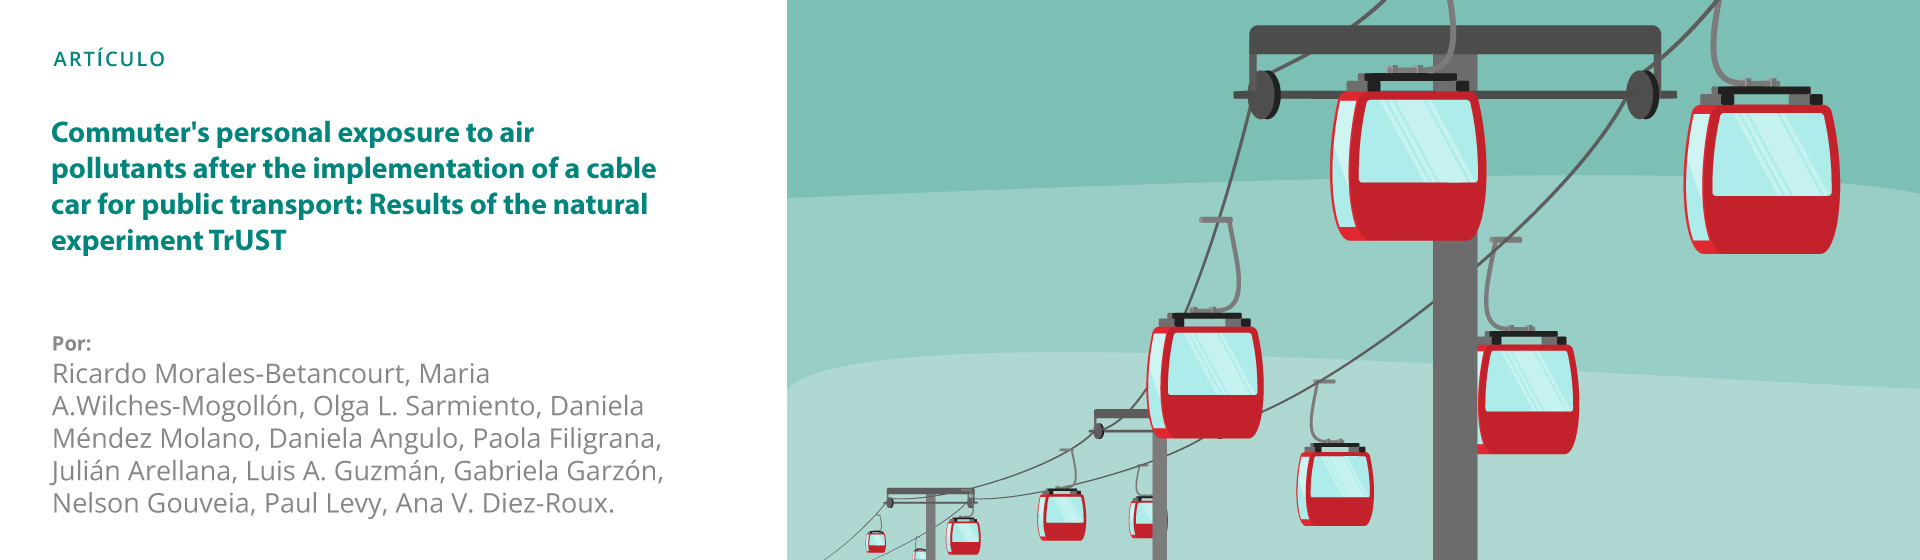 Commuter's personal exposure to air pollutants after the implementation of a cable car for public transport: Results of the natural experiment TrUST